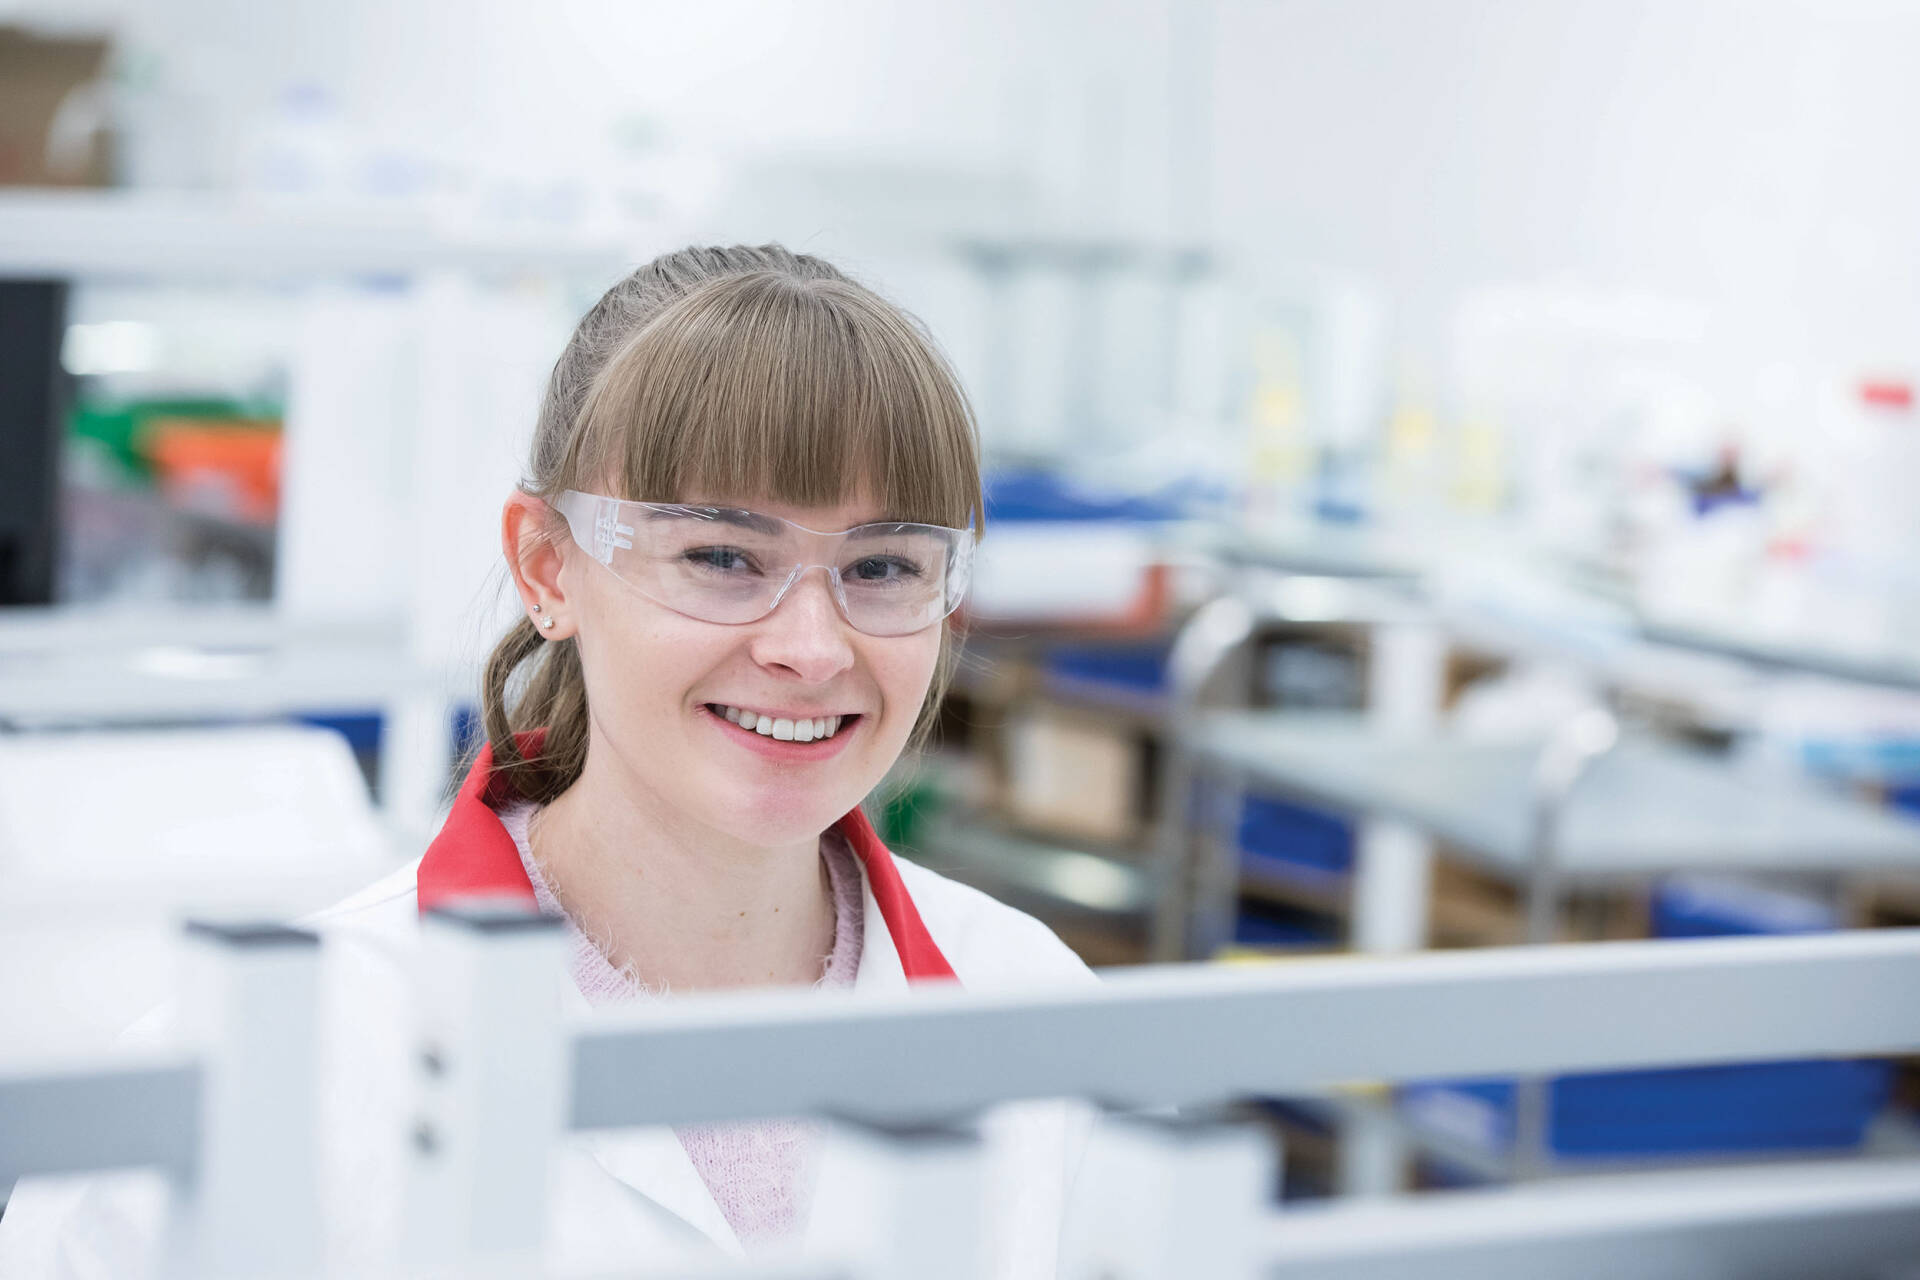 Smiling student in a lab